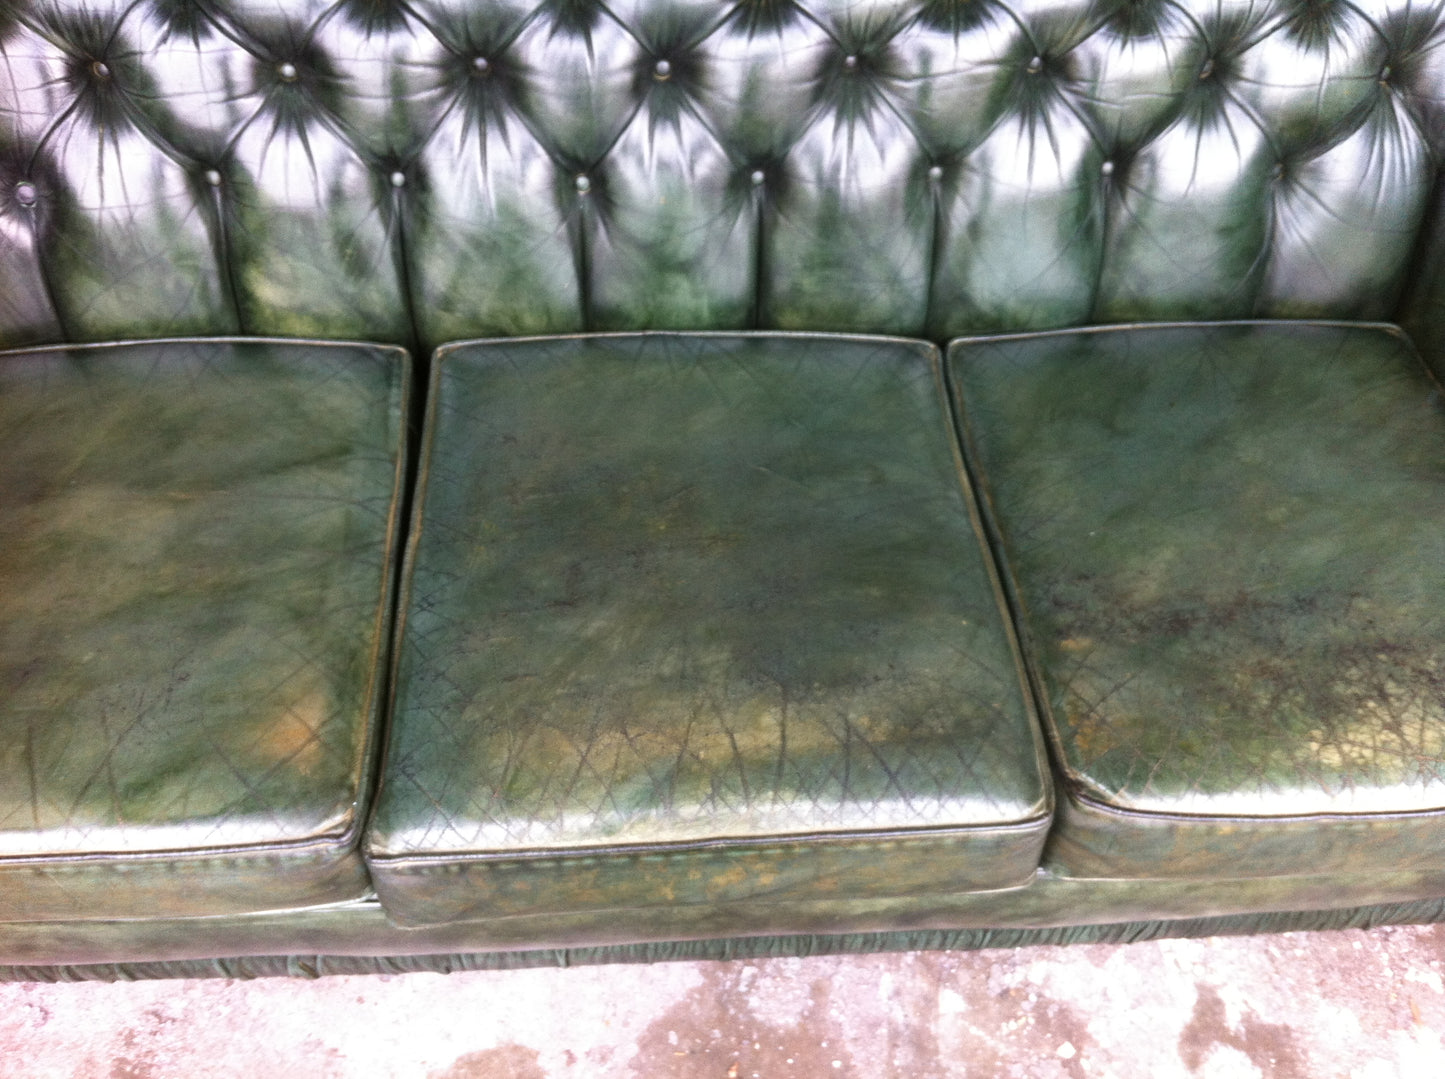 Vintage Wade "Antique" Green Hand Dyed Leather Chesterfield Sofa Circa.1970